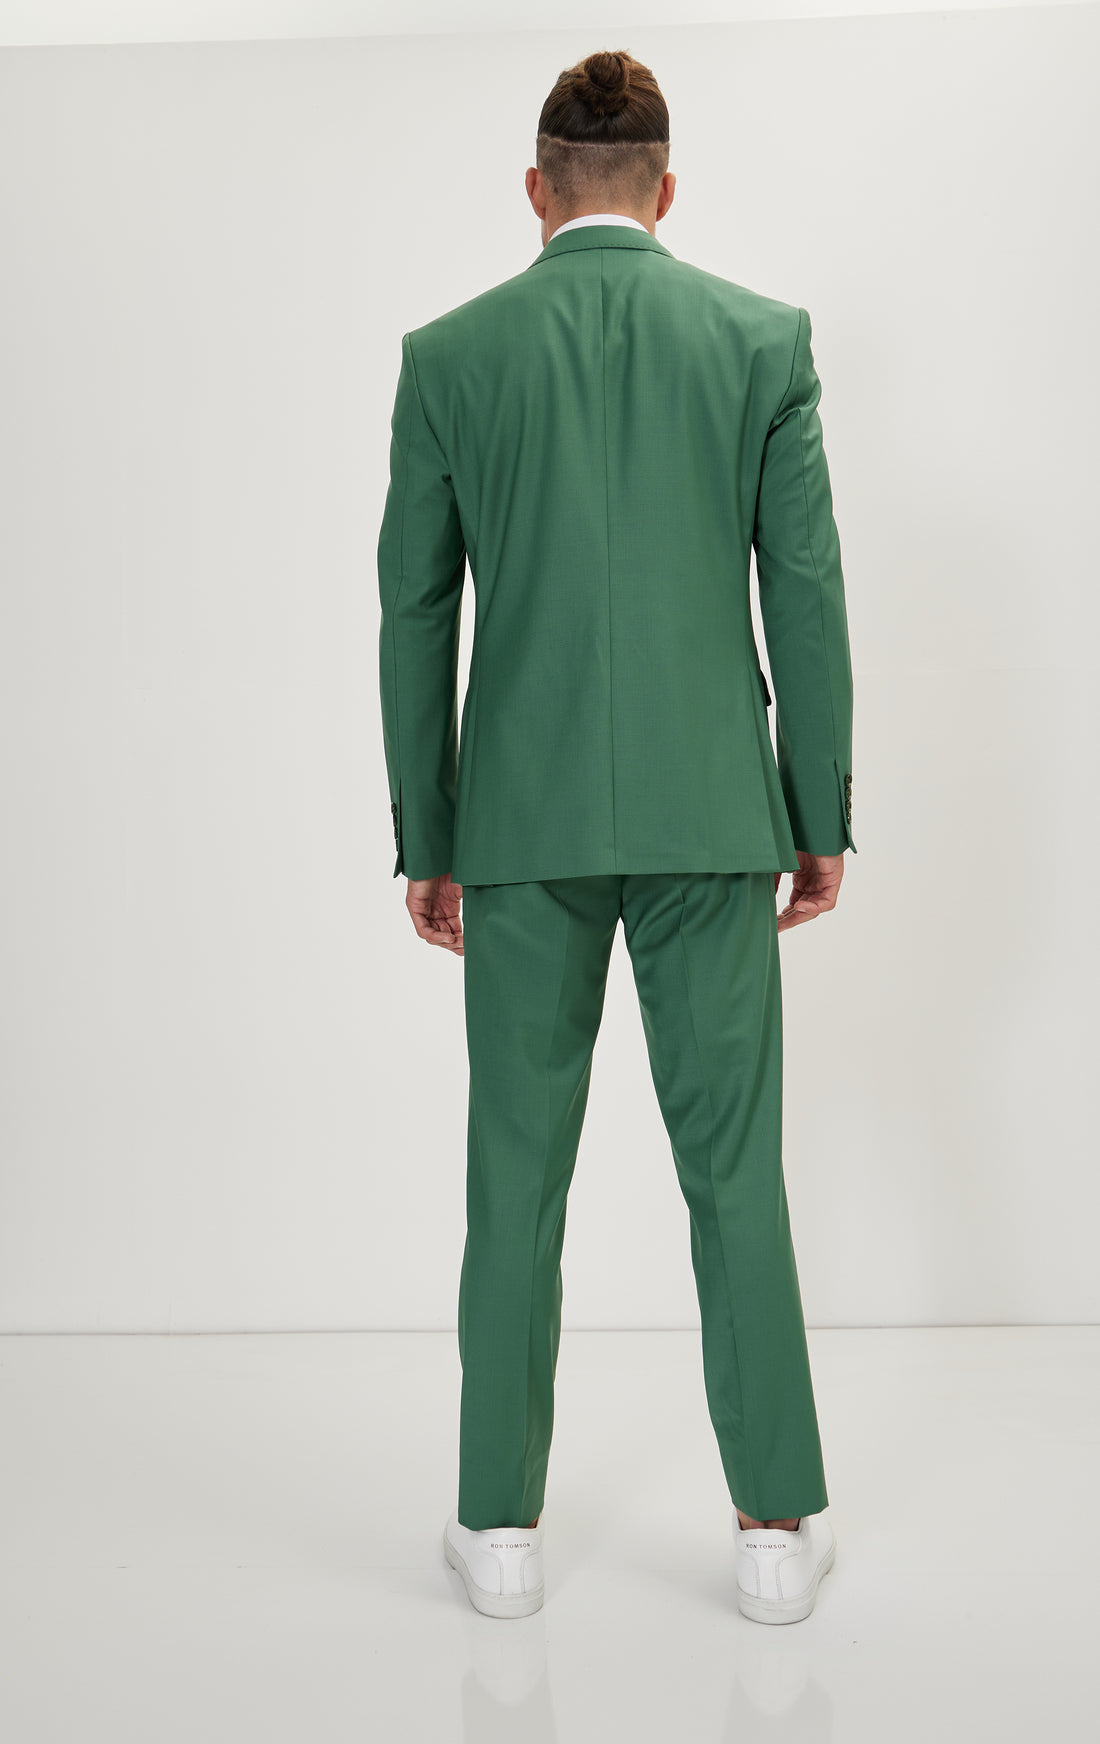 N° R206 SUPER 120S MERINO WOOL DOUBLE BREASTED SUIT - VERDANT GREEN